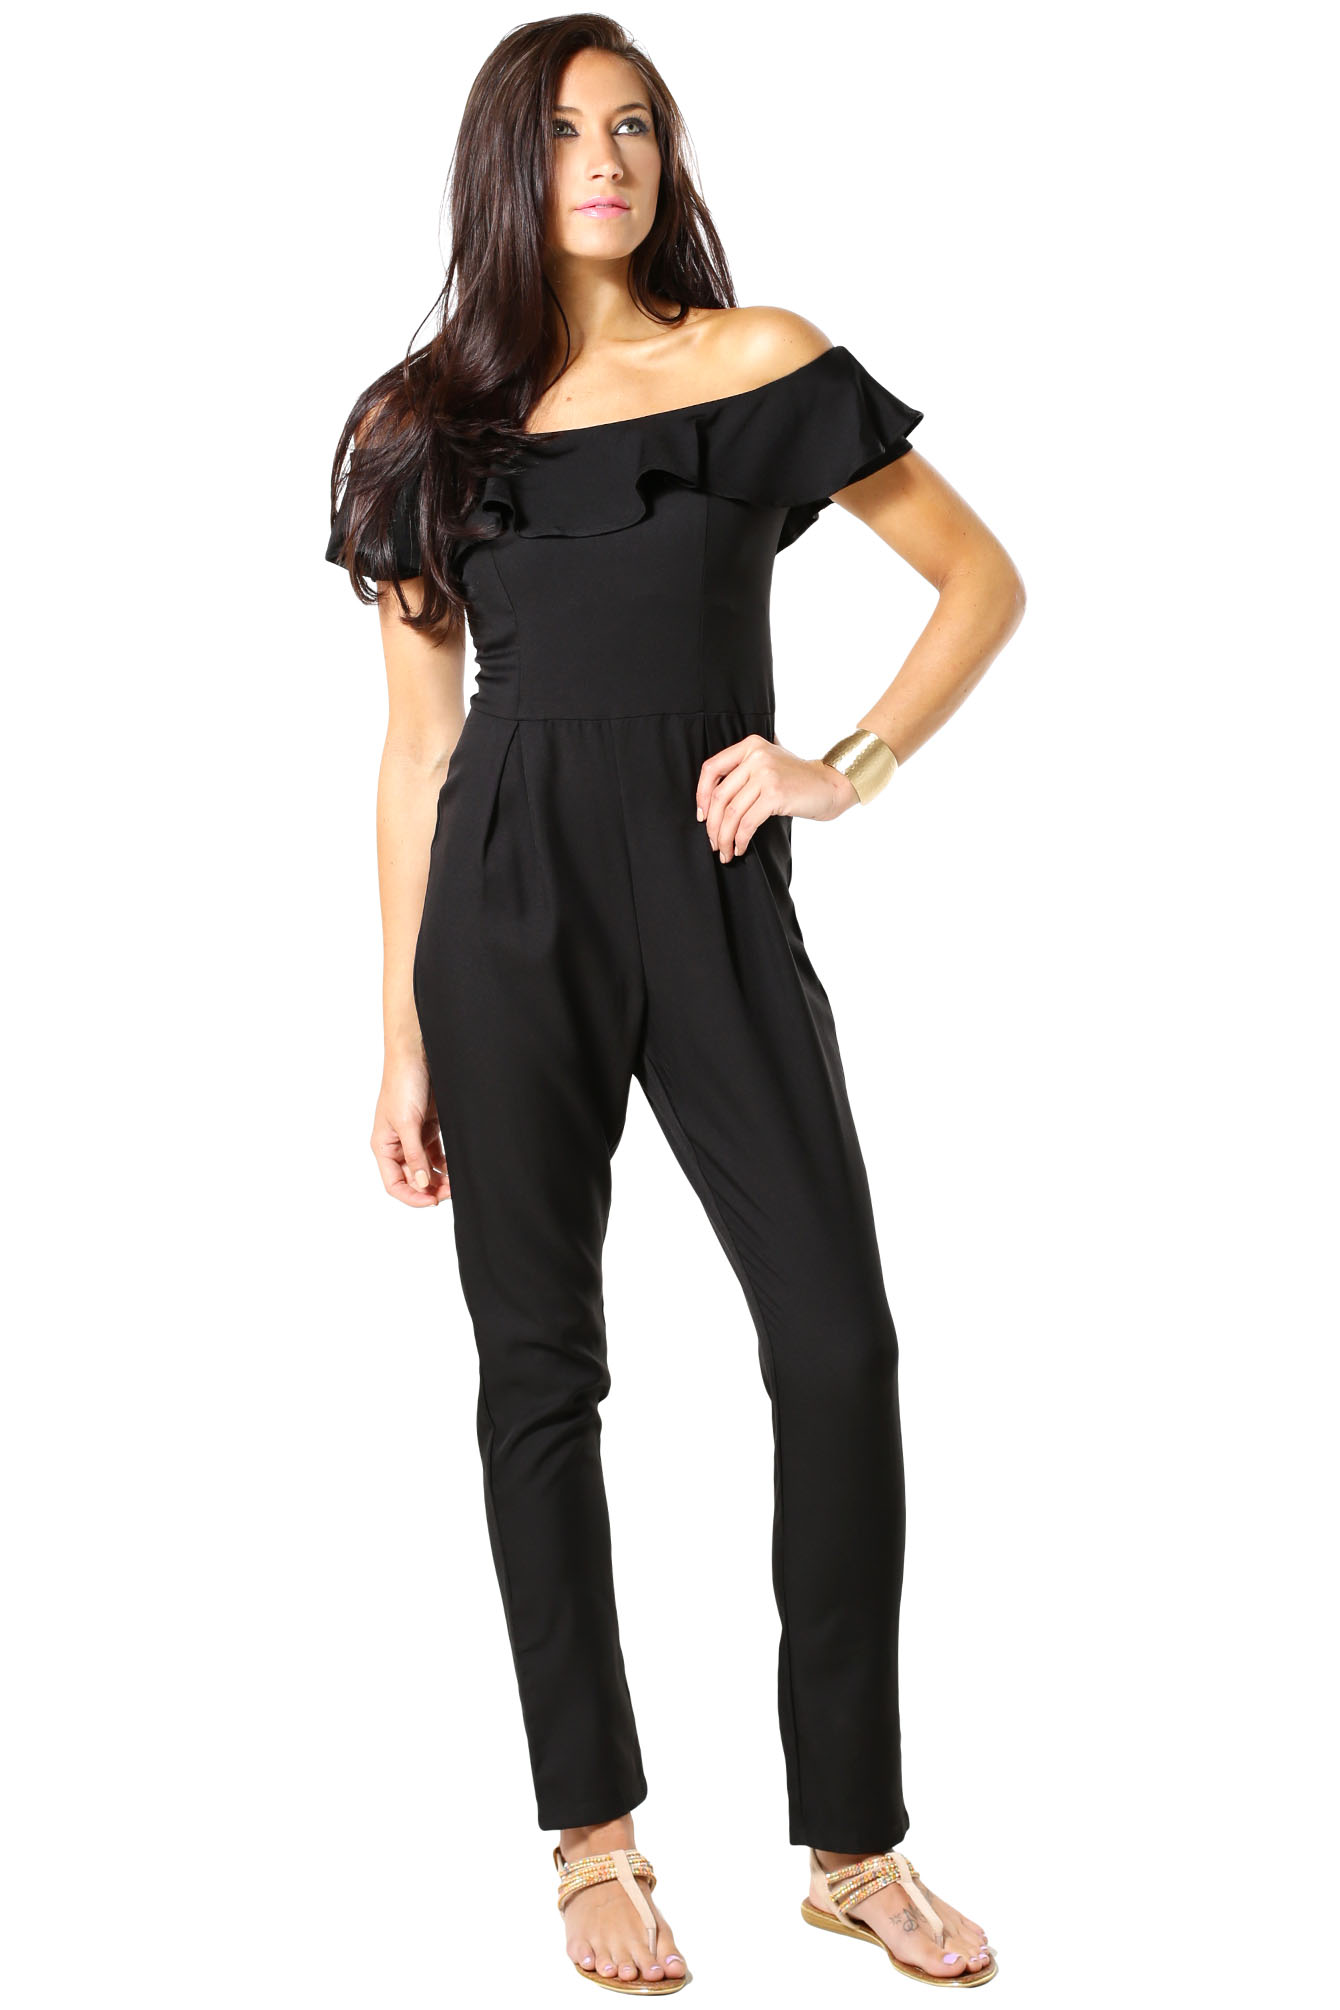 RUFFLE TOP JUMPSUIT (SEE MORE COLORS) on Luulla